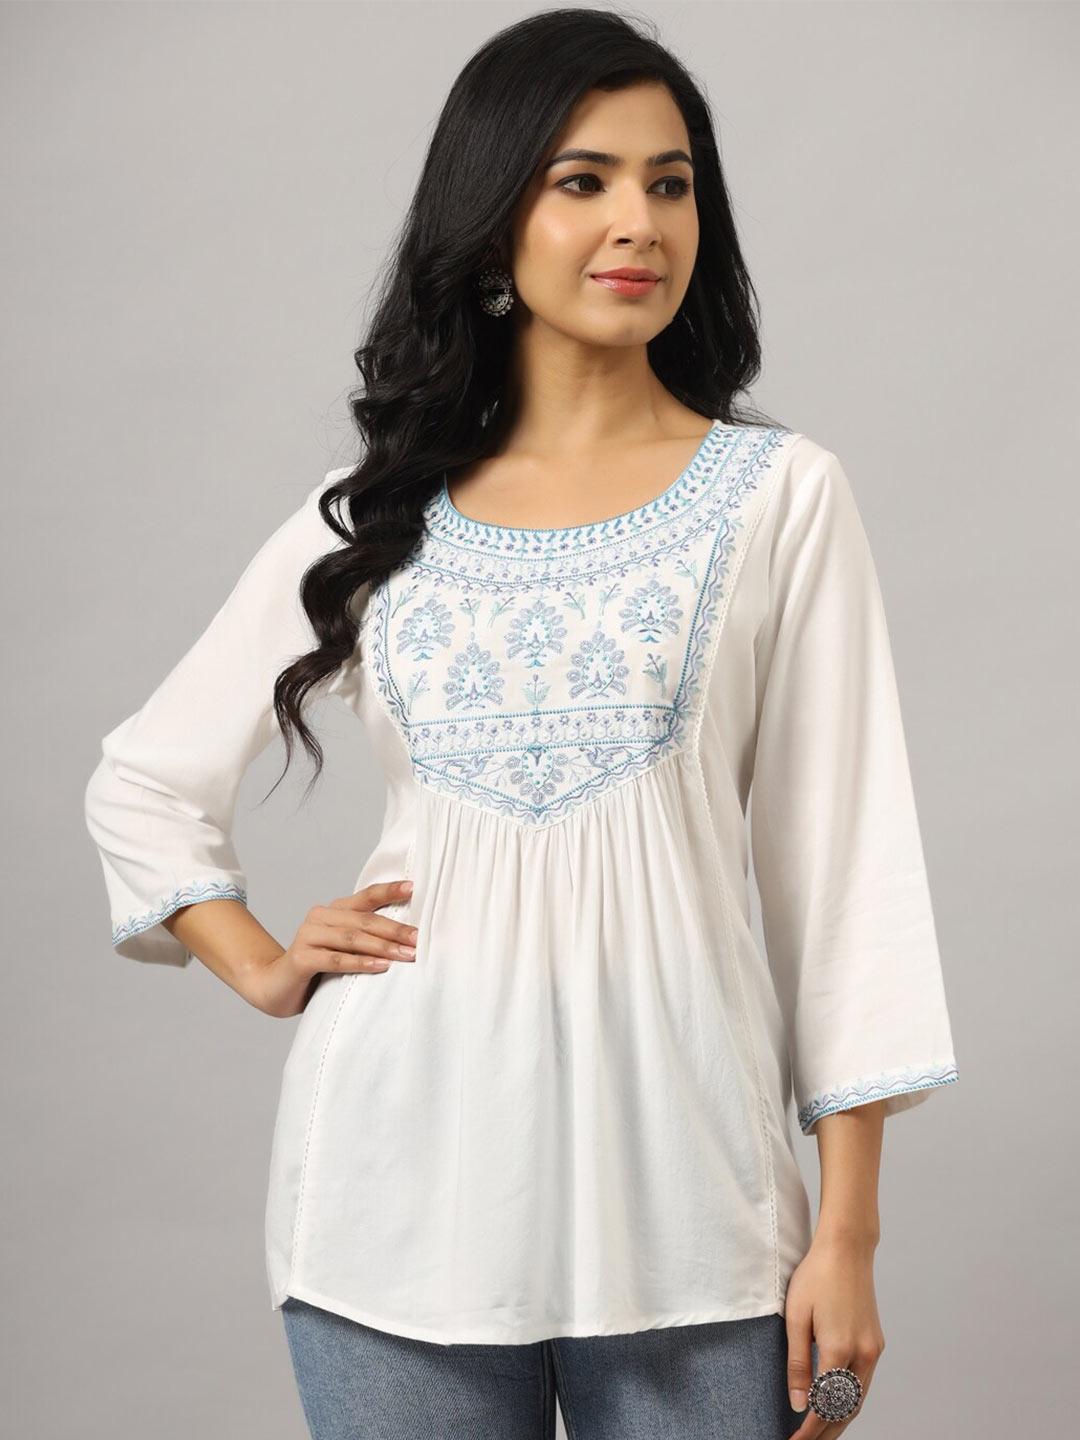 amchoor-floral-embroidered-round-neck-empire-top